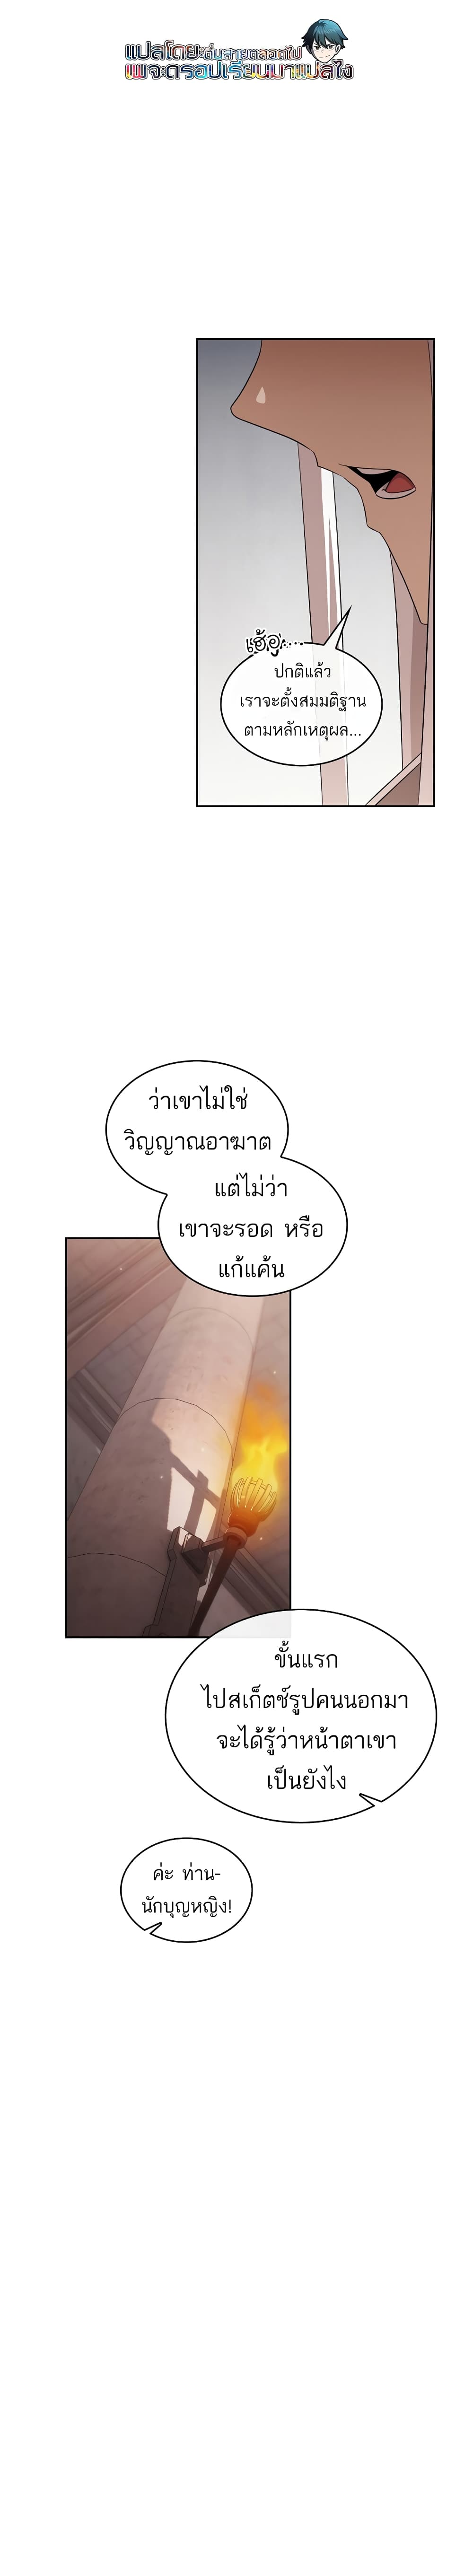 Is This Hero for Real à¸à¸­à¸à¸à¸µà¹ 33 (11)